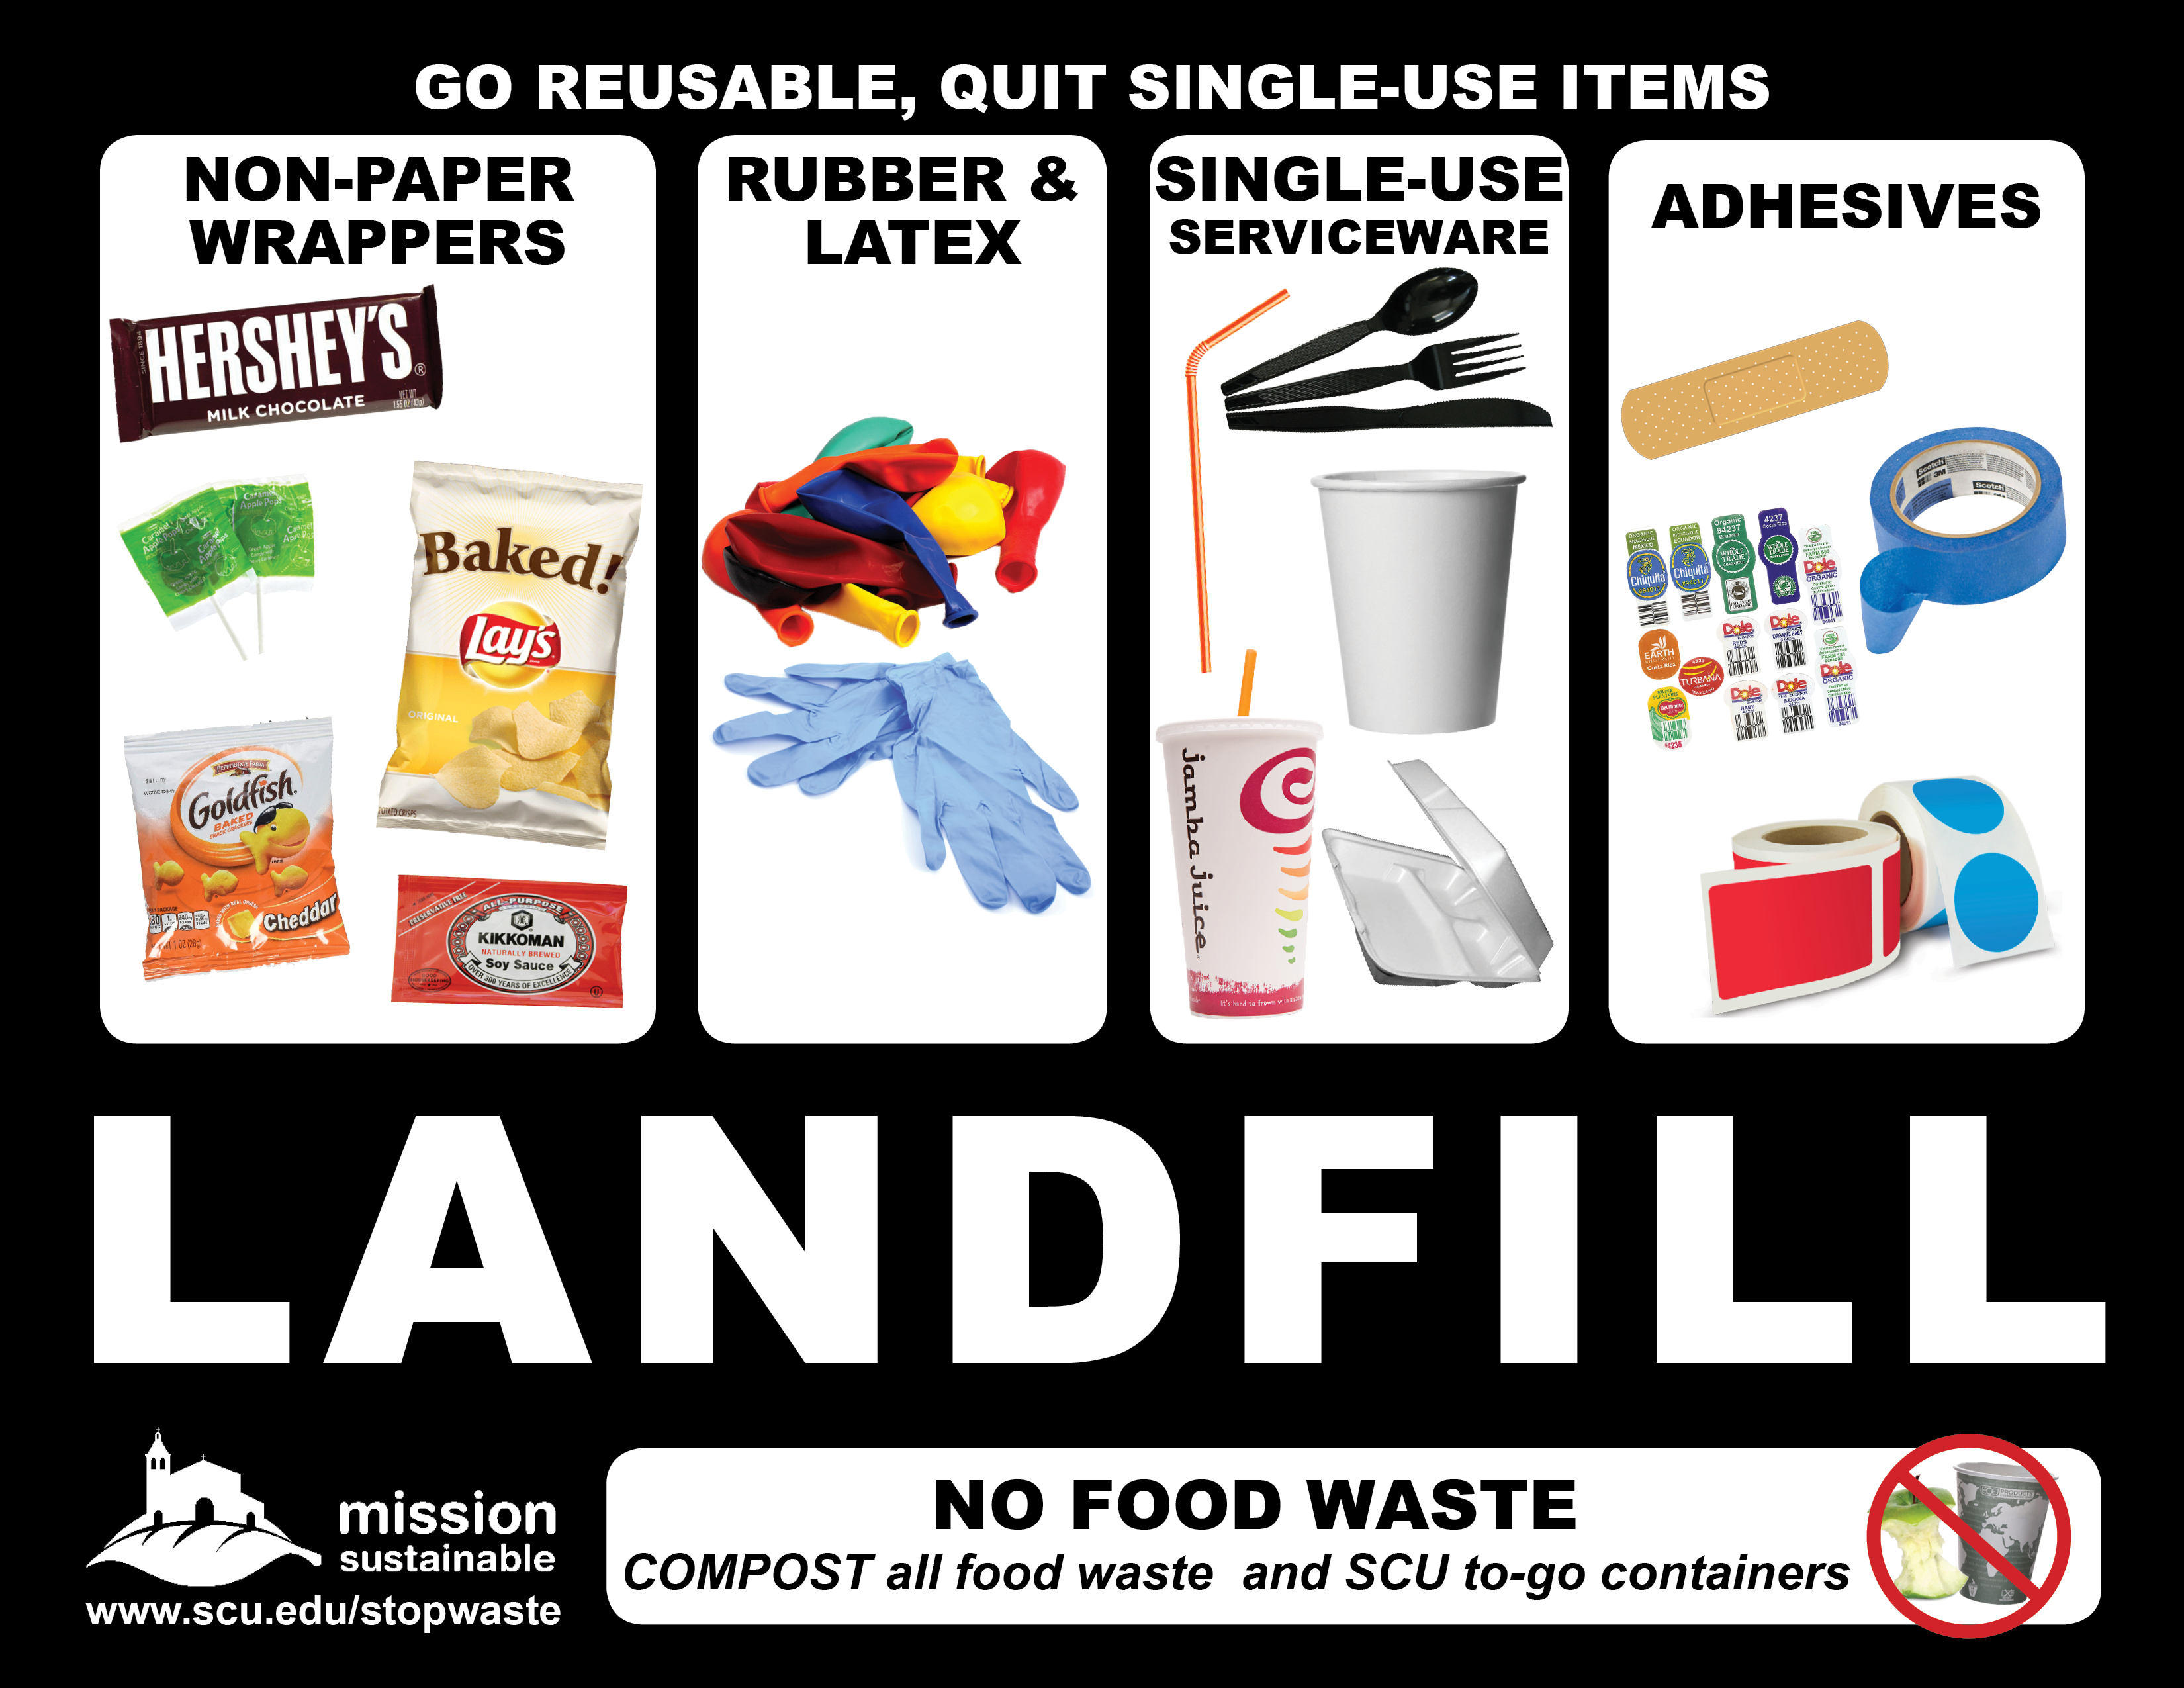 Pictures of items that must be sent to the landfill, including single-use serviceware, adhesives, and non-paper wrappers - Single-use serviceware, latex, adhesives, and non-paper wrappers Link to file